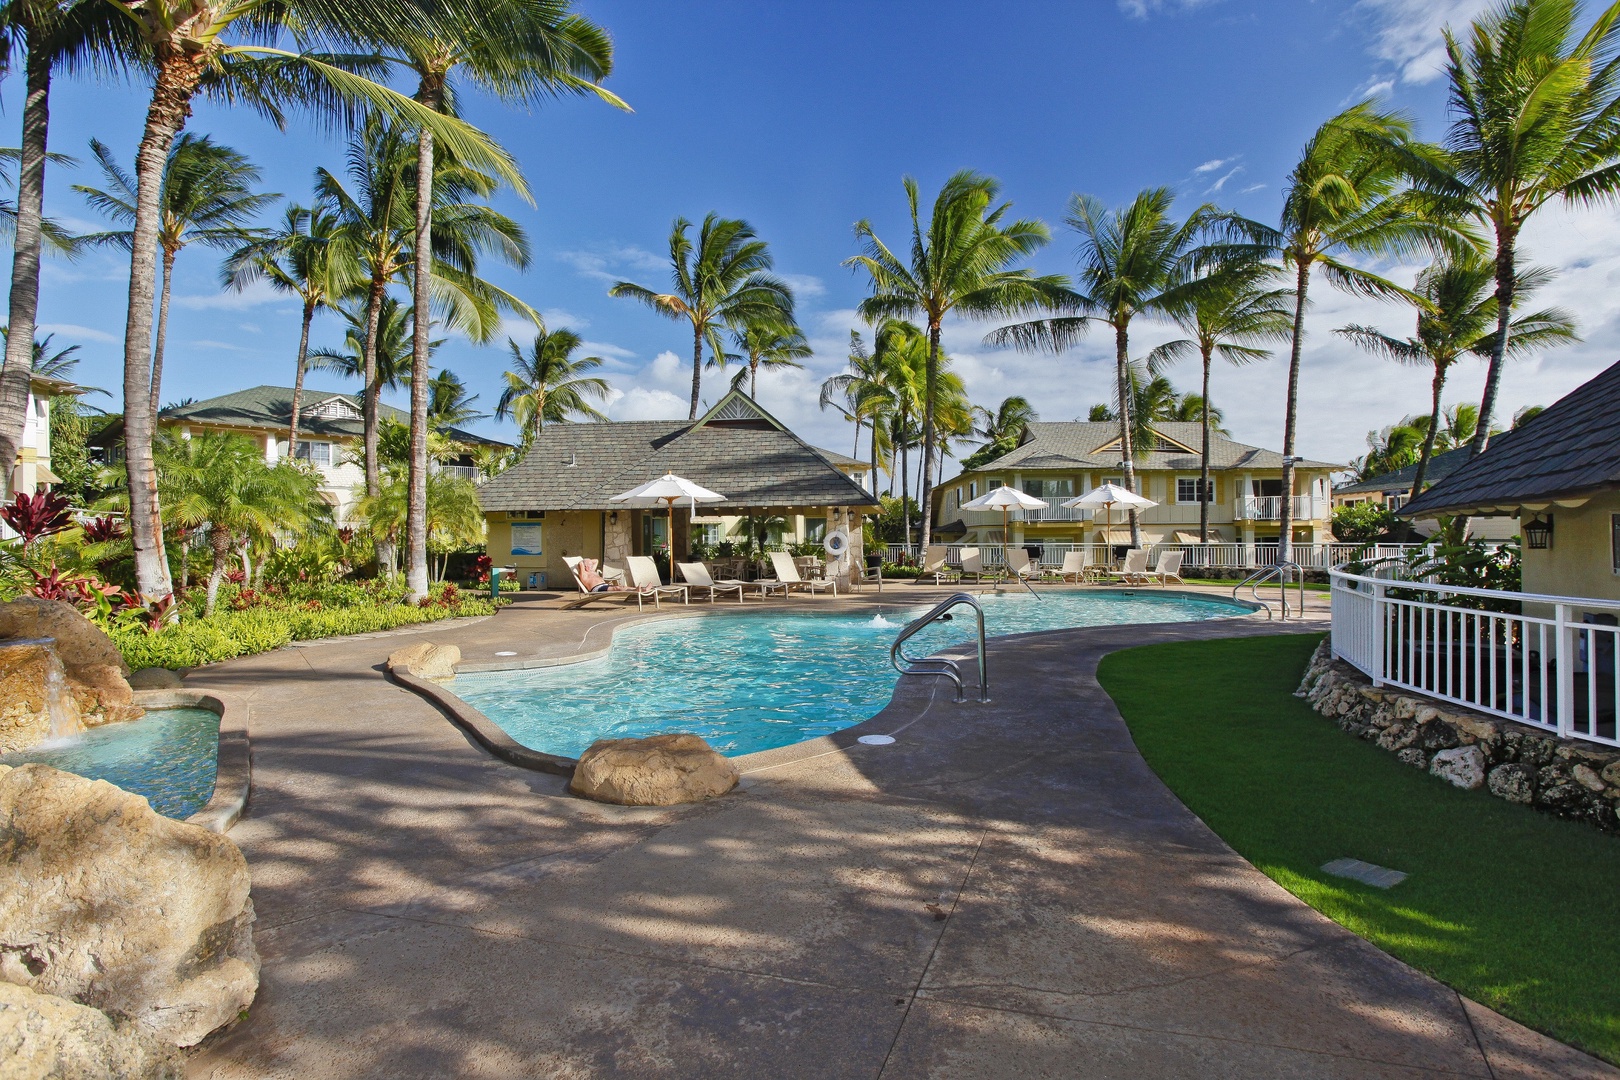 Kapolei Vacation Rentals, Kai Lani 24B - Take a dip in the crystal blue waters of the pool.